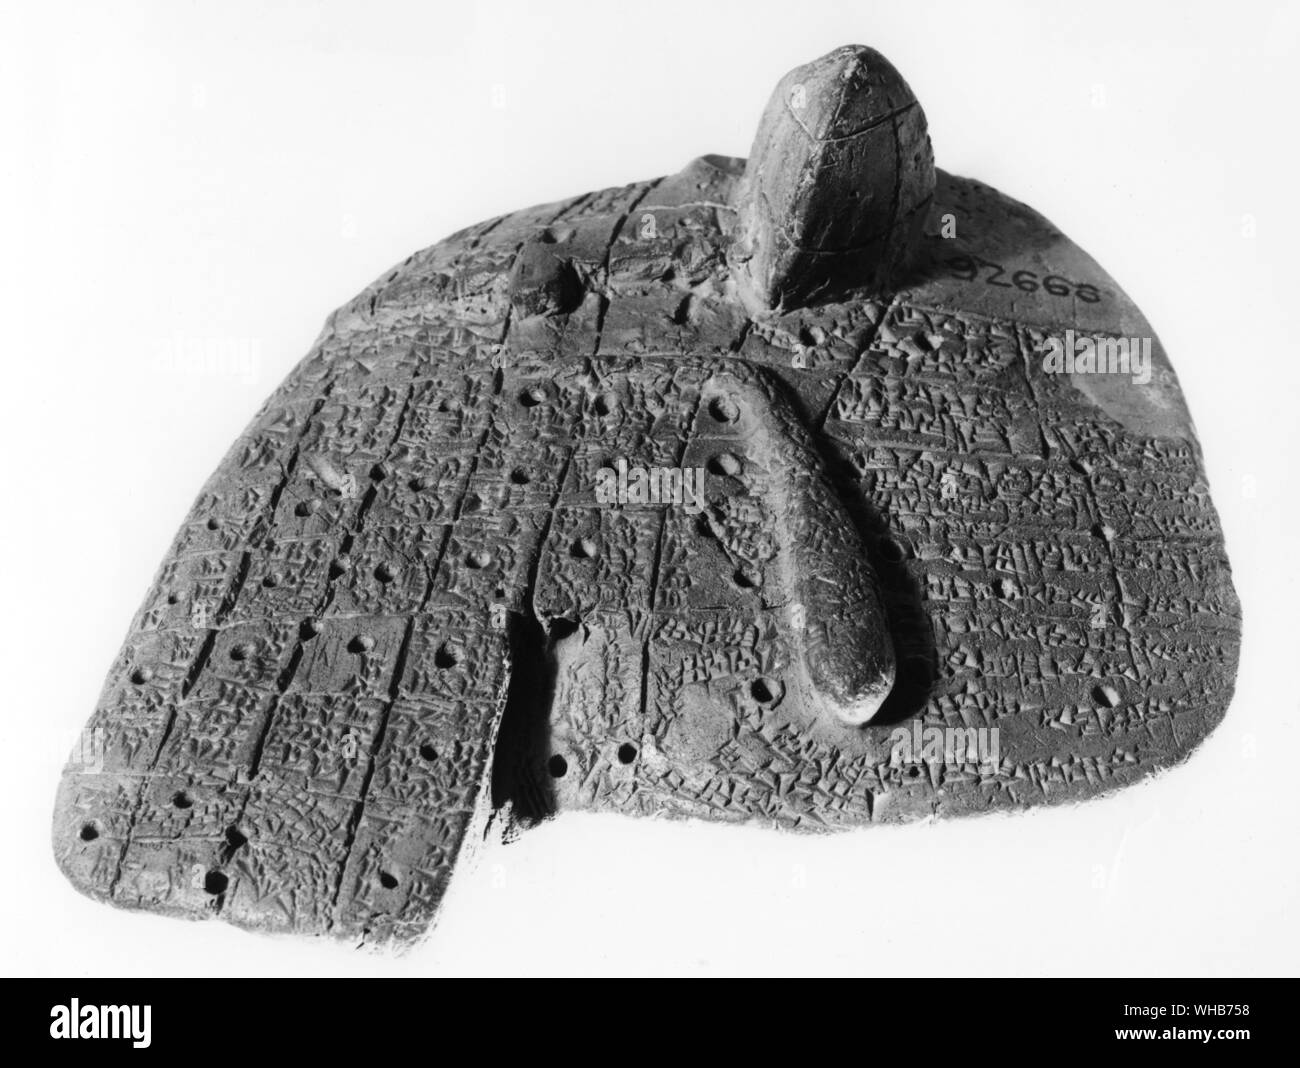 Clay model of a liver - Babylonian. Stock Photo